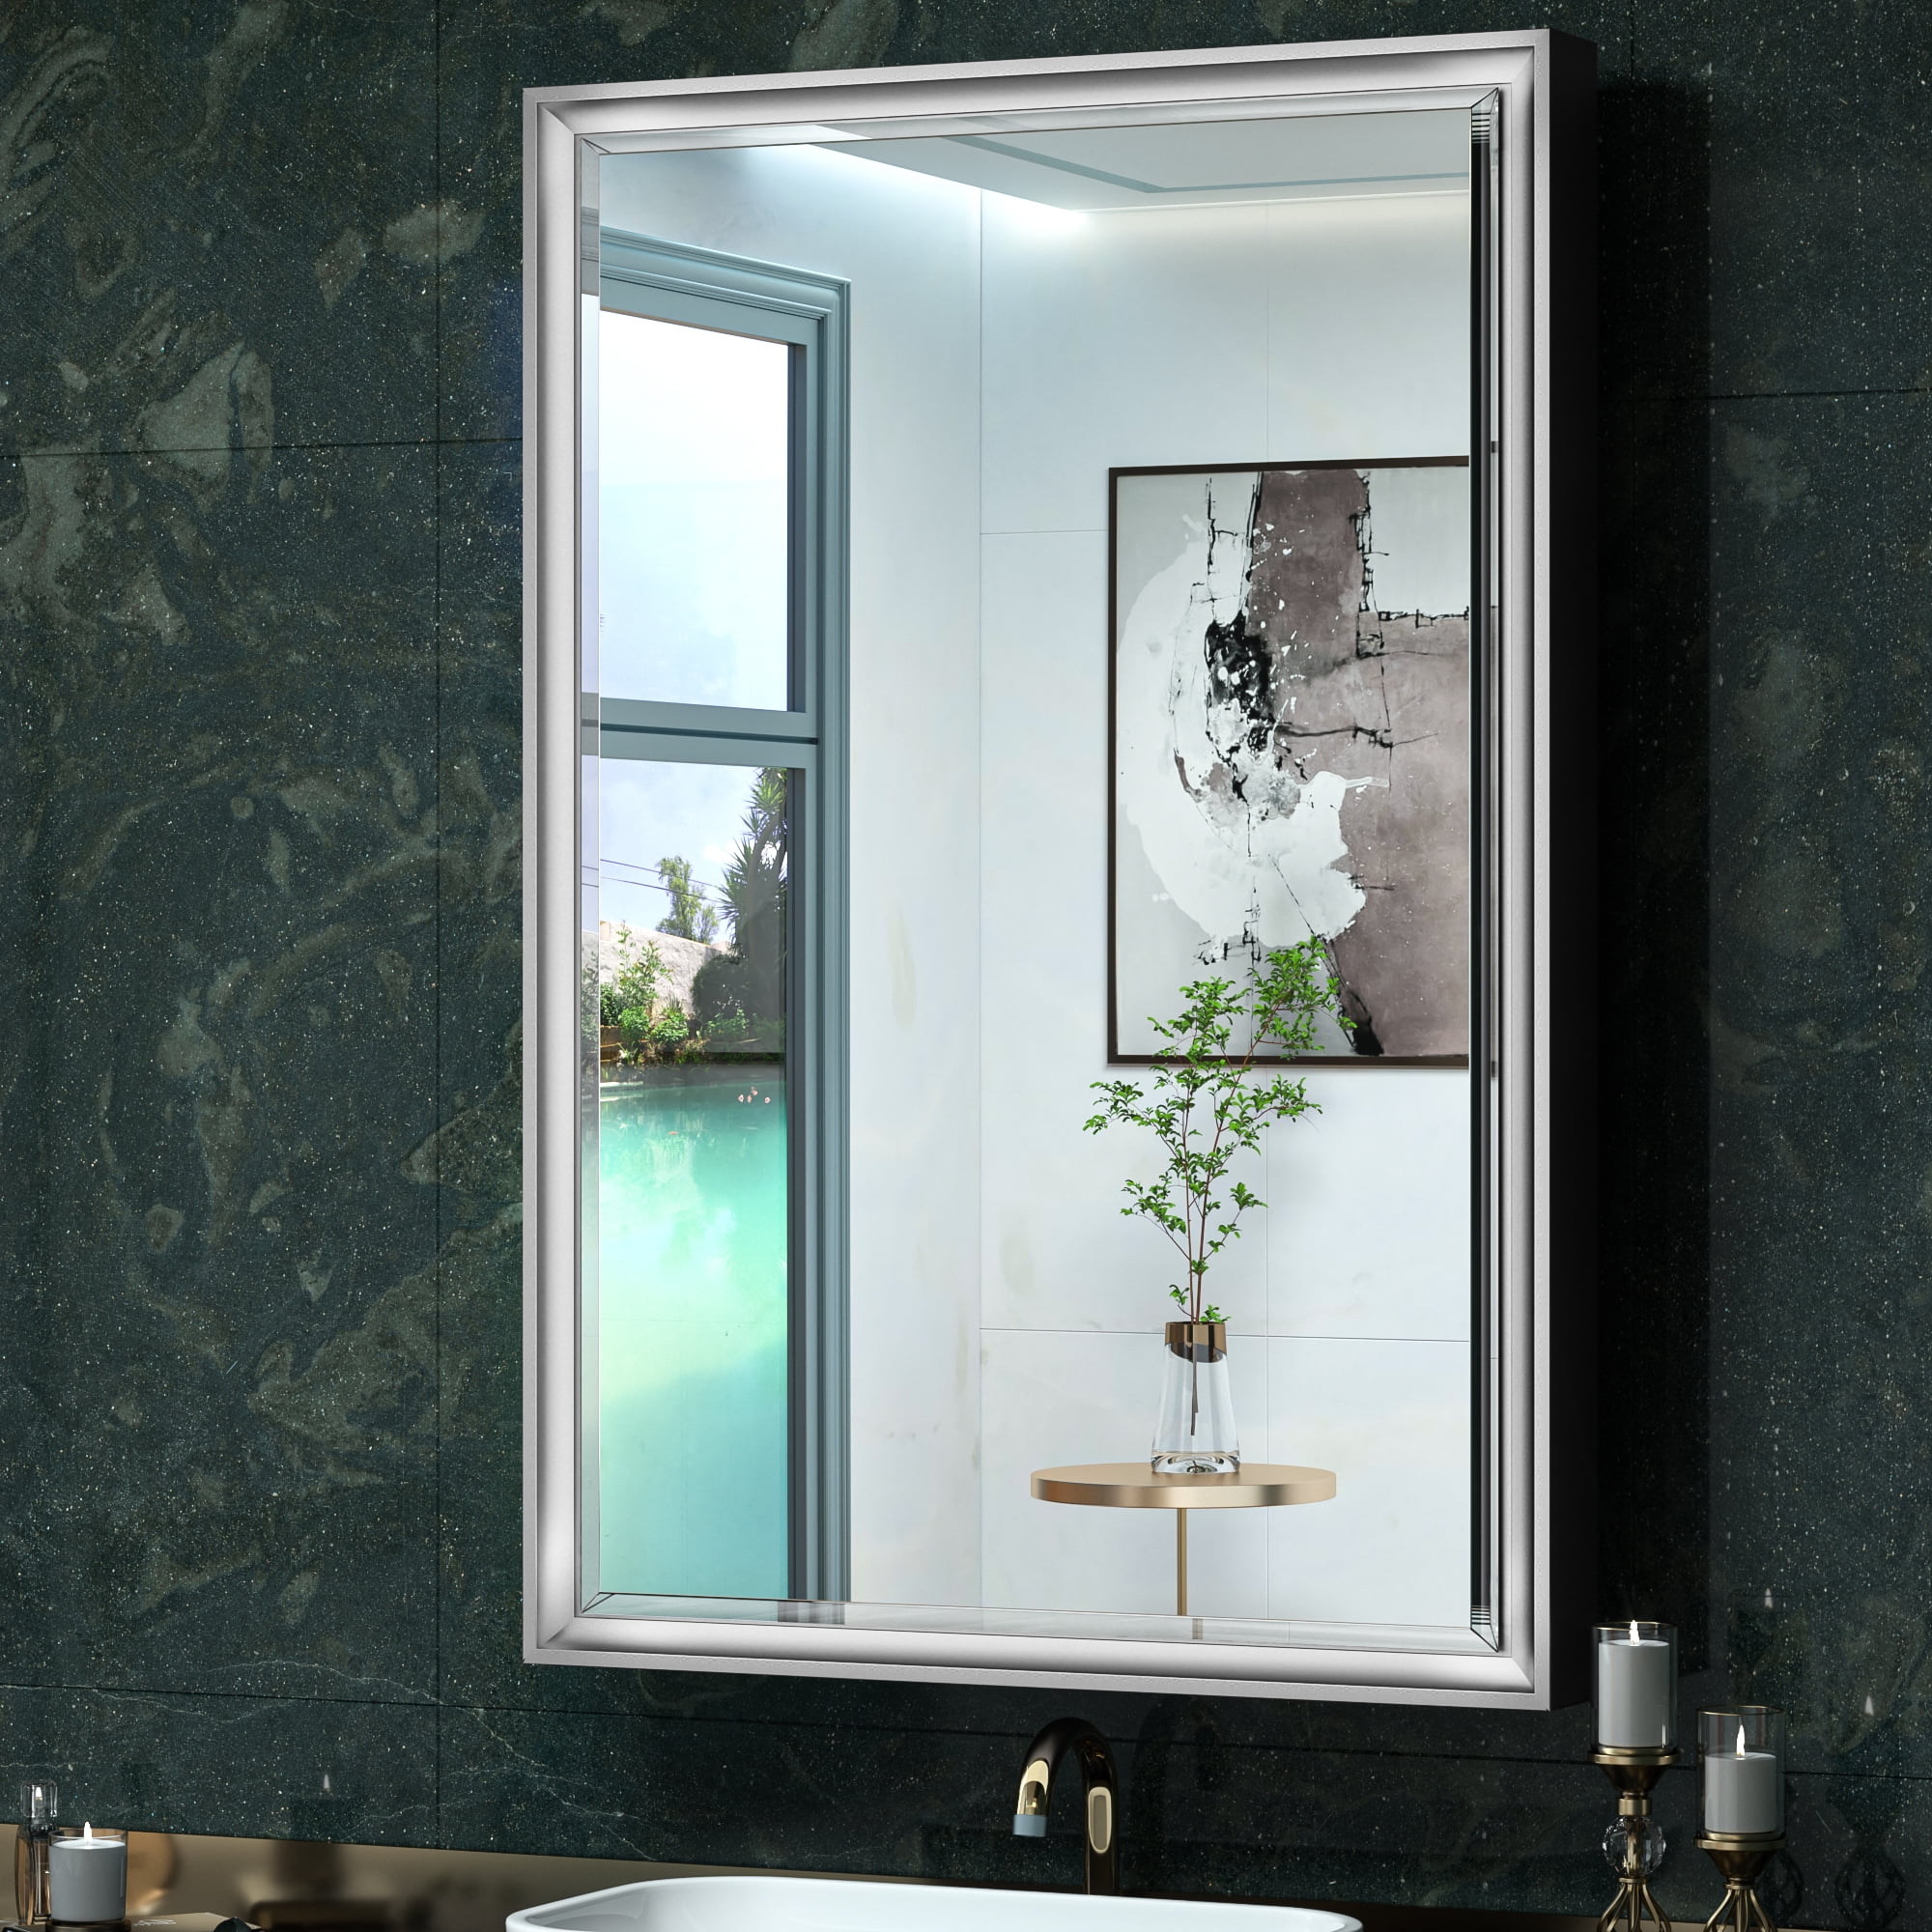 24 in. W x 30 in. H Silver Wall-Mounted/Recessed Mounted Medicine Cabinet with Mirror Bathroom Large Storage